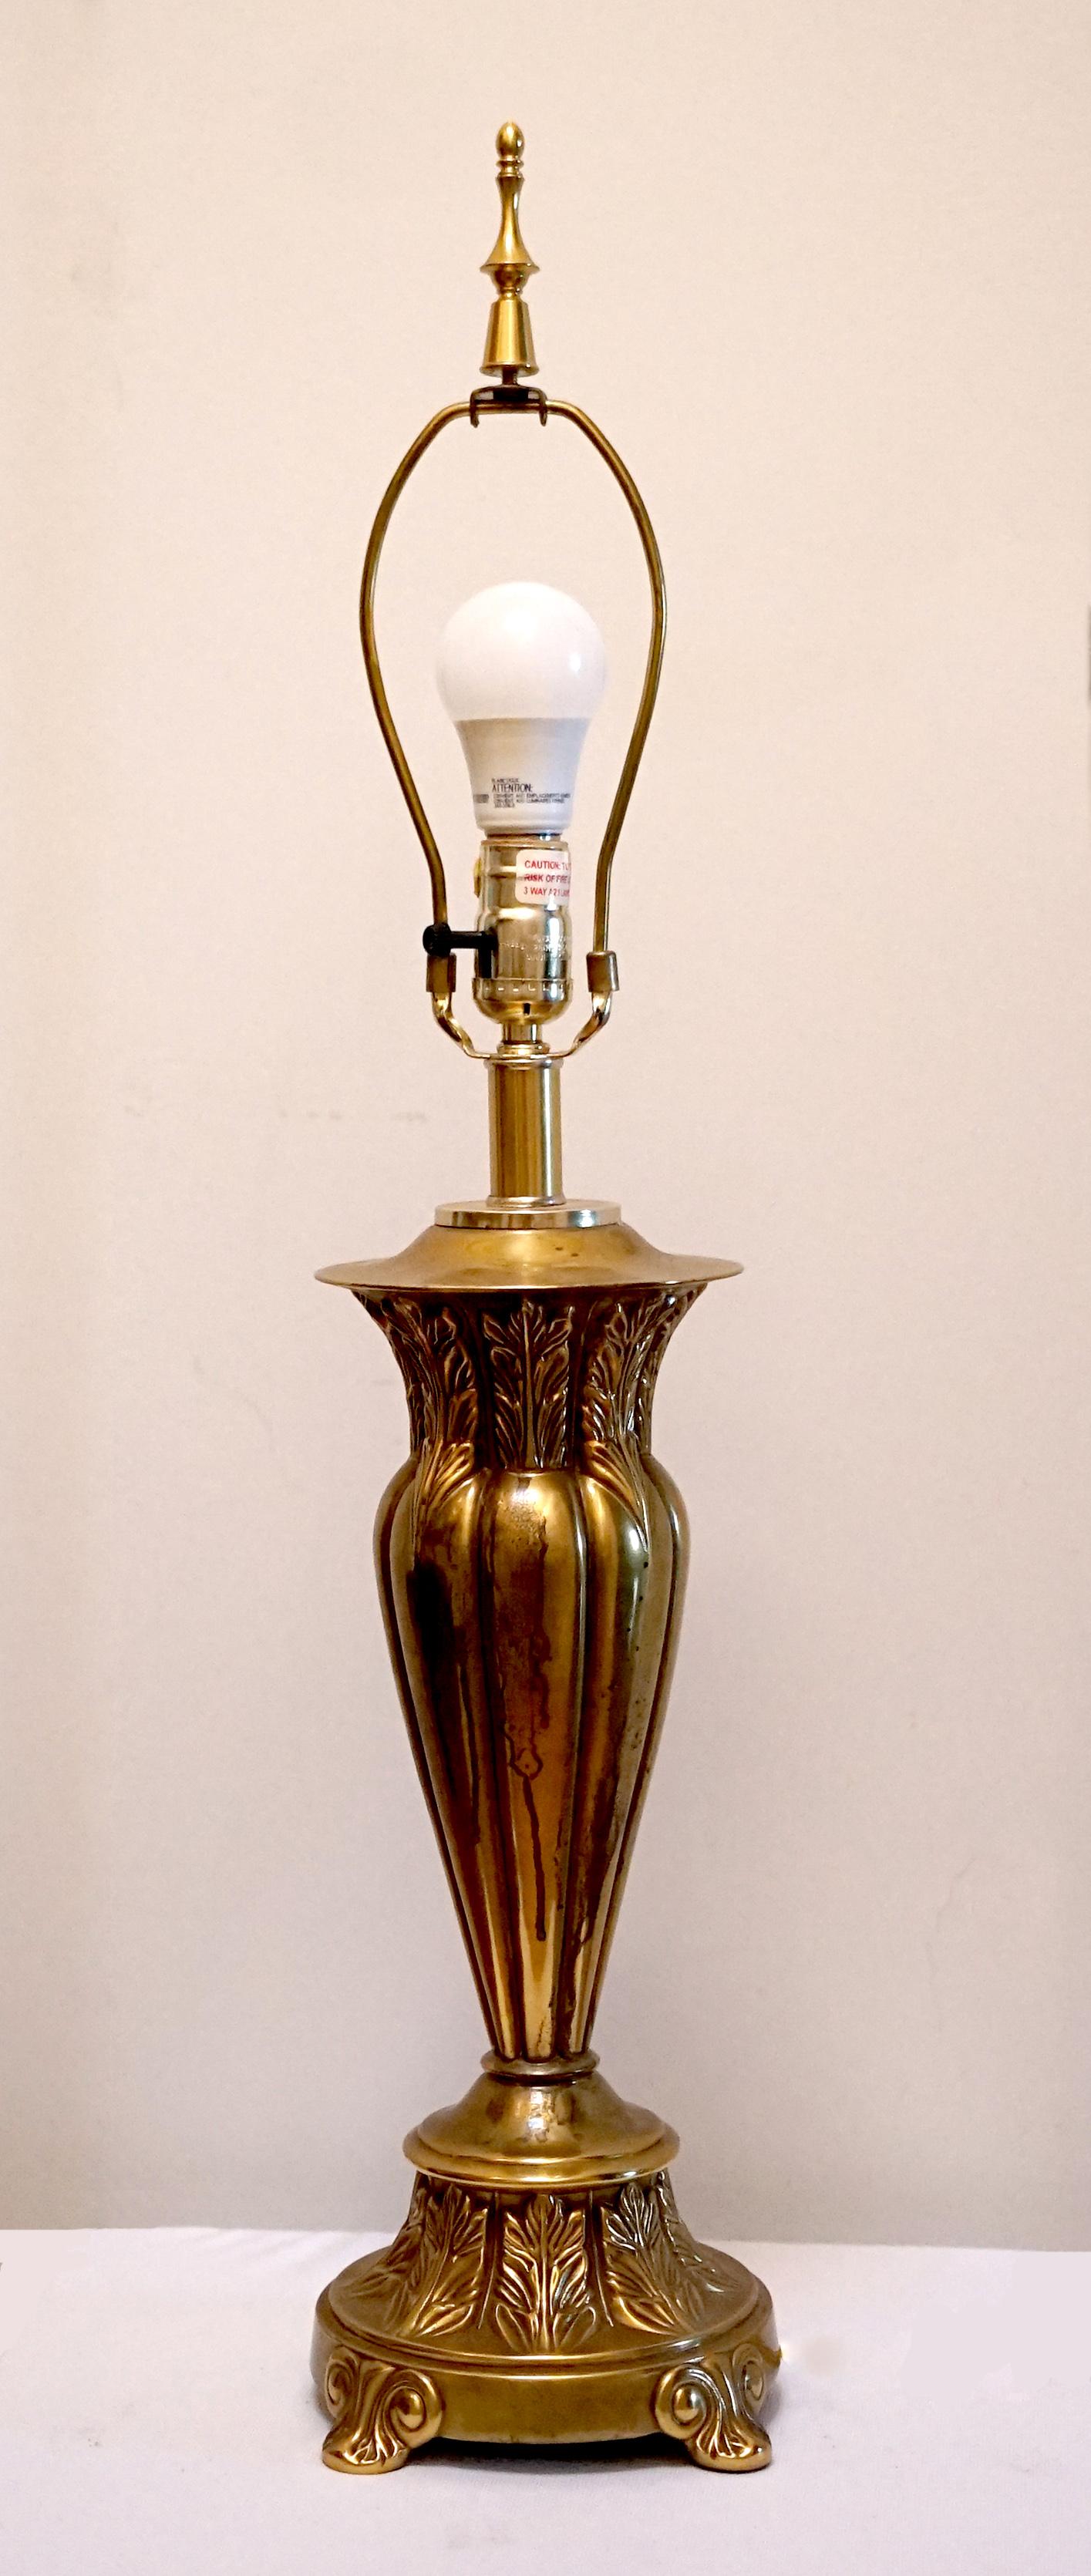 The options for this statement lamp are many. From a place in an entryway, on a console, or a place on an occasional table inside a business or home office. This lamp provides an elegant example of art deco style. It is slender and graceful with